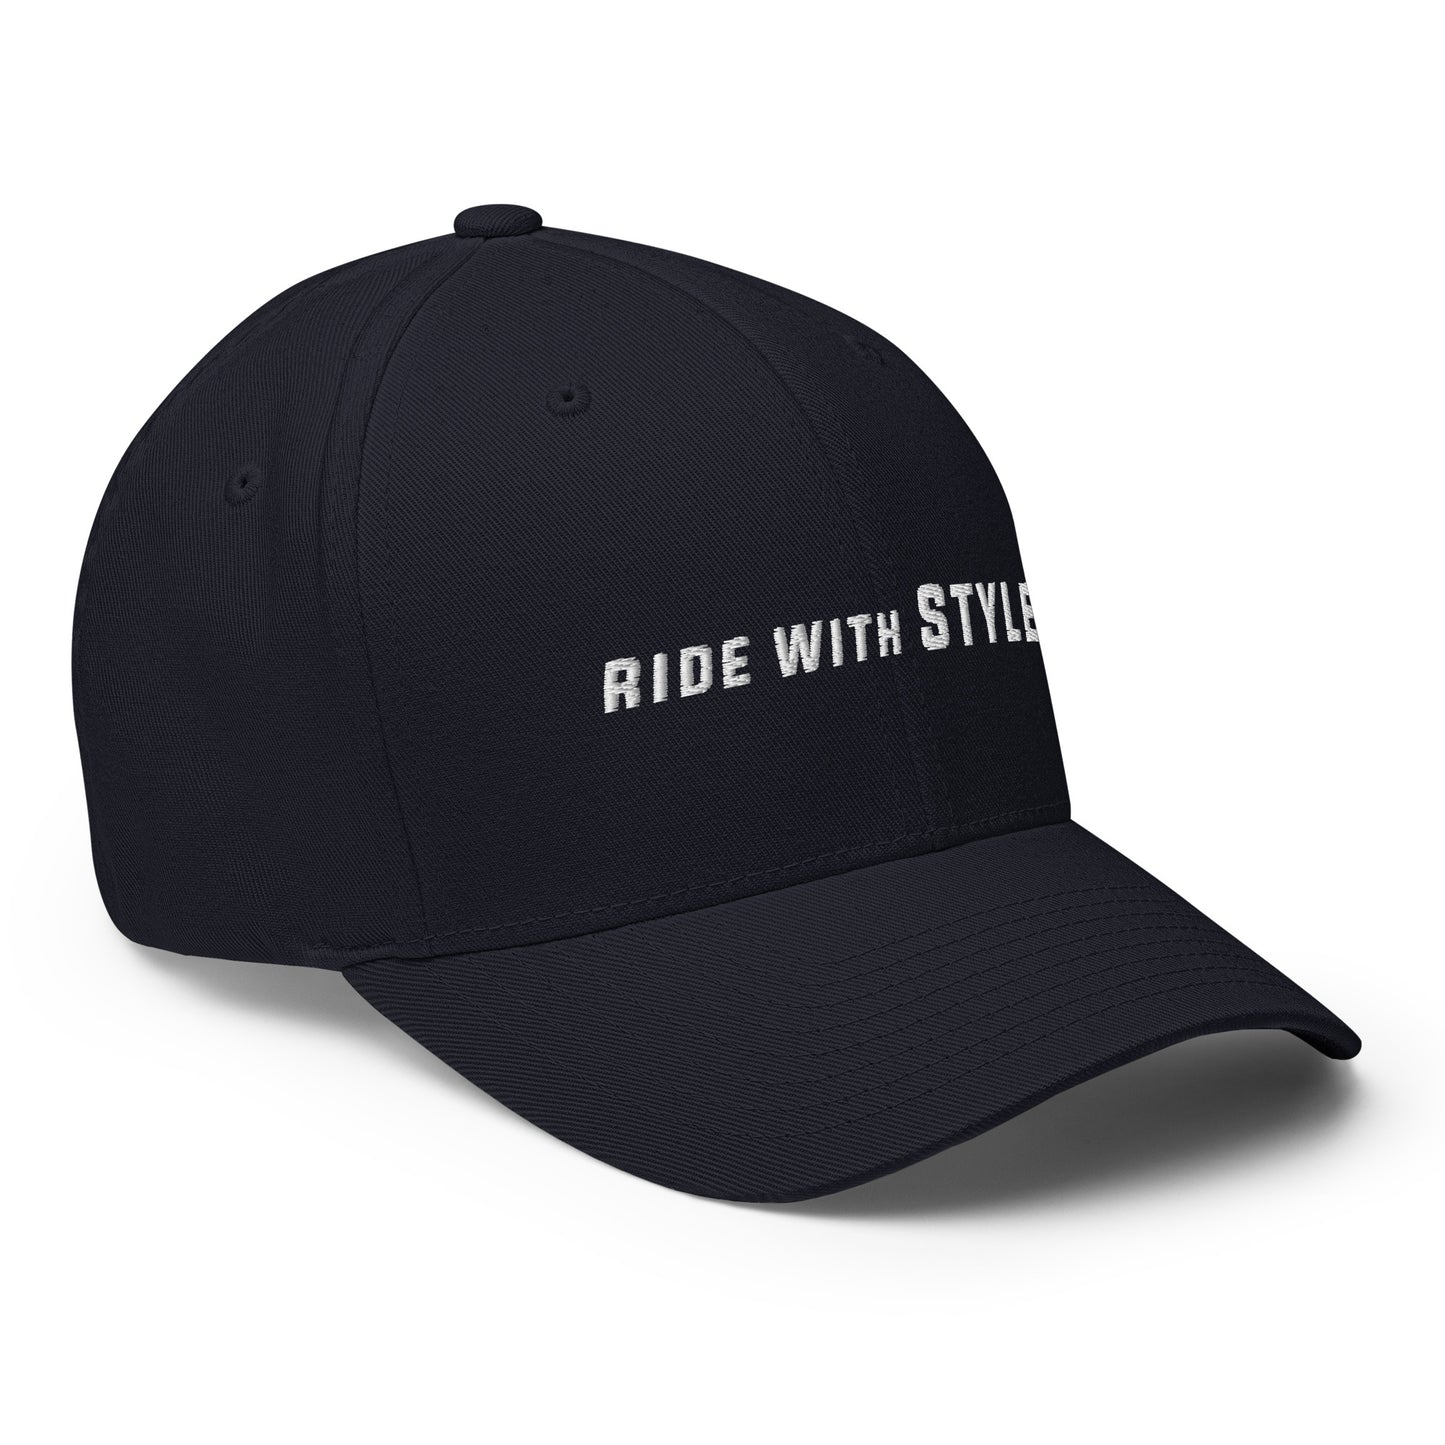 Ride With Style Base Cap